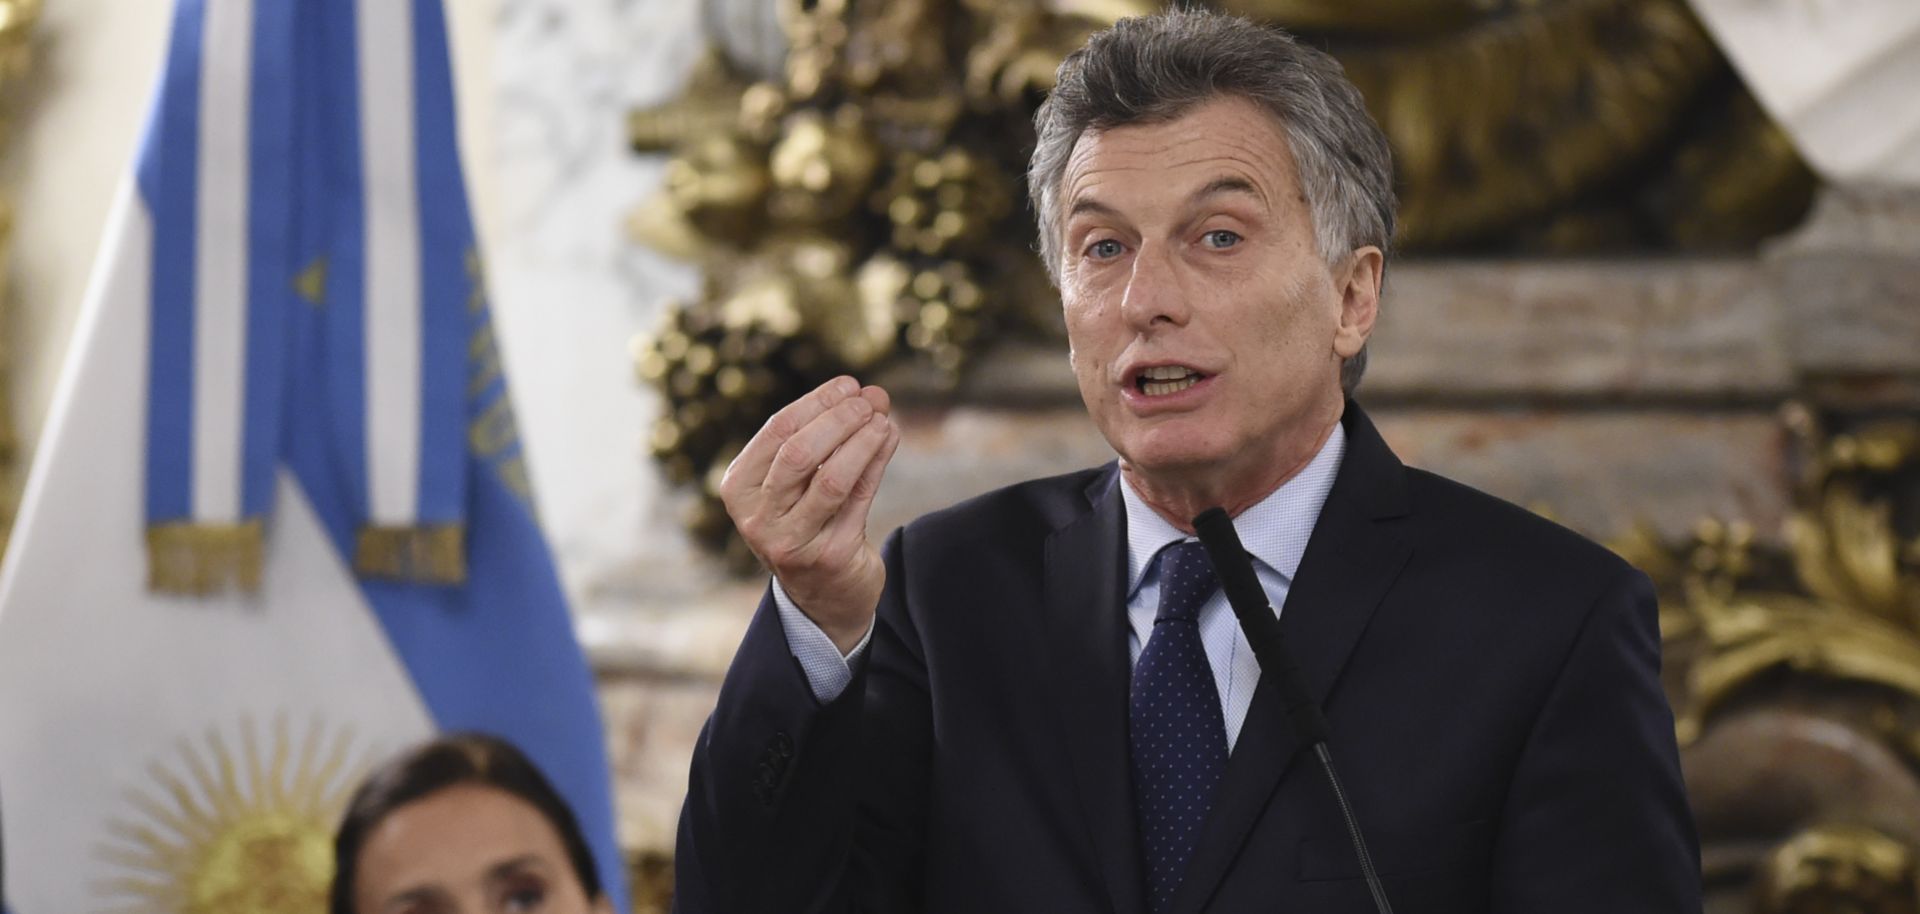 Argentine President Mauricio Macri promised to reform his country's economy. Congressional elections in October will determine the future of Macri's reforms.